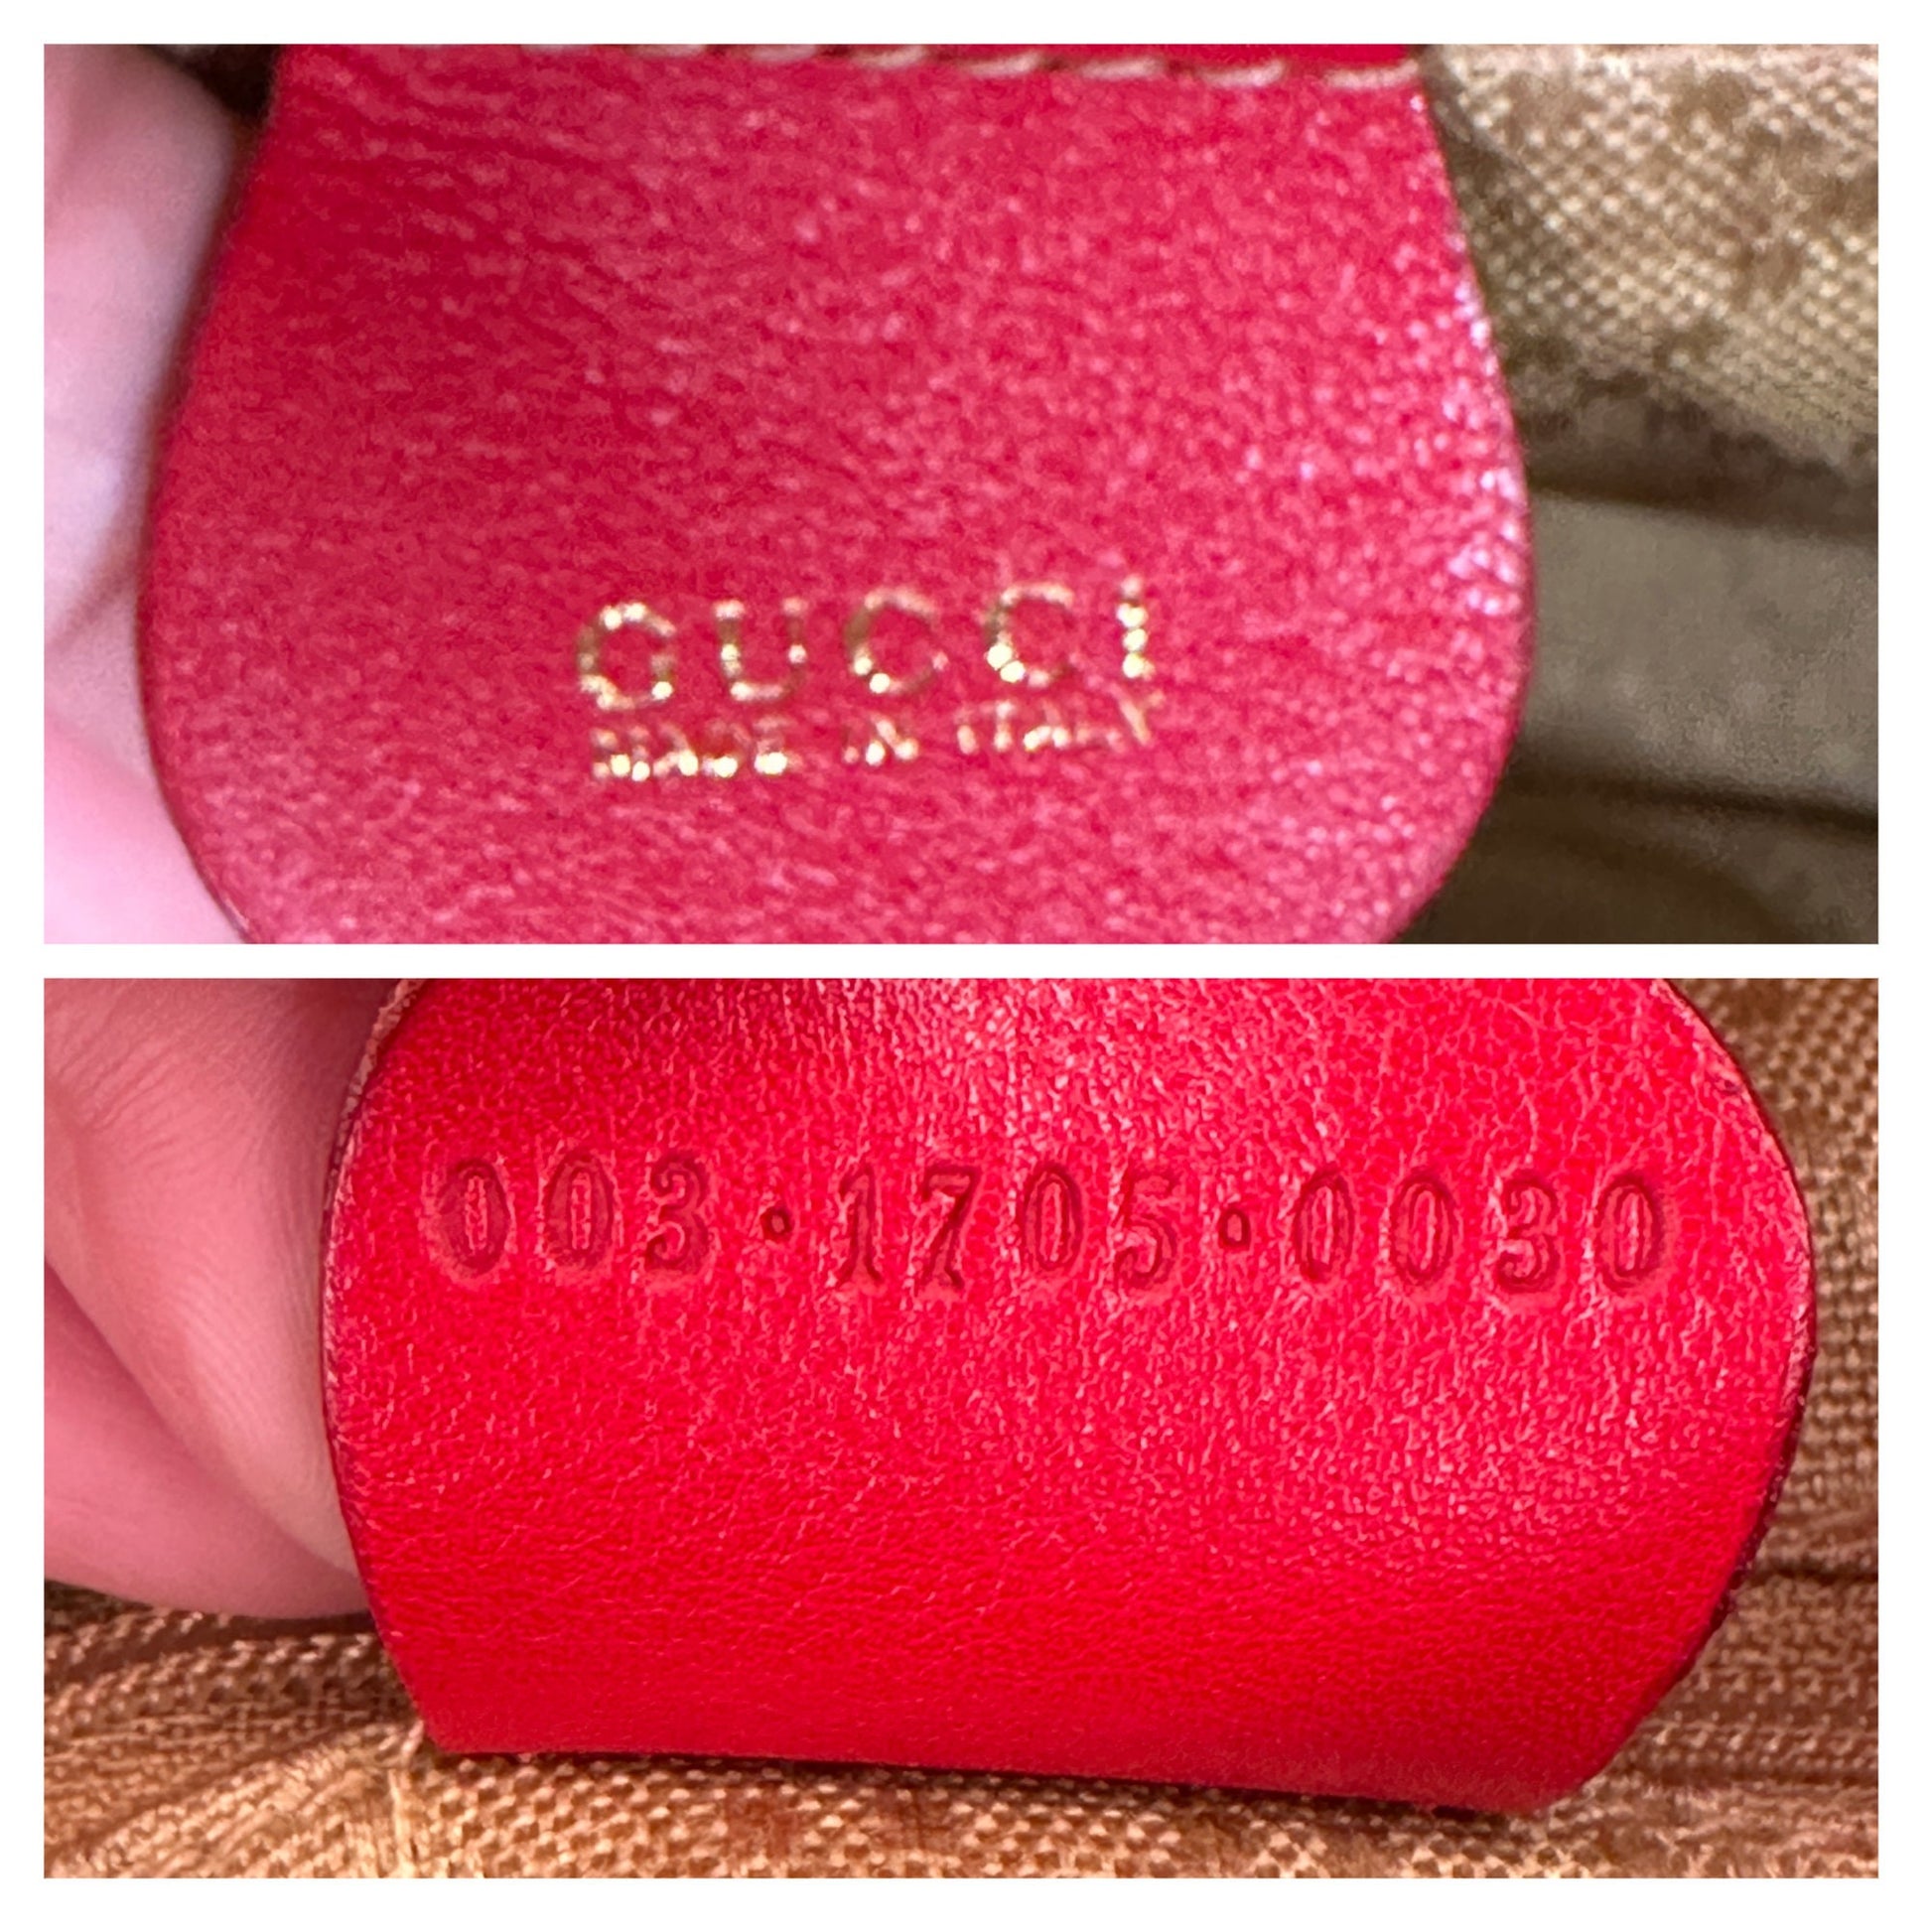 GUCCI VINTAGE 100% Authentic Genuine Leather Iconic Bamboo Handle Backpack, Medium Size, Red, 2000's, Good Condition